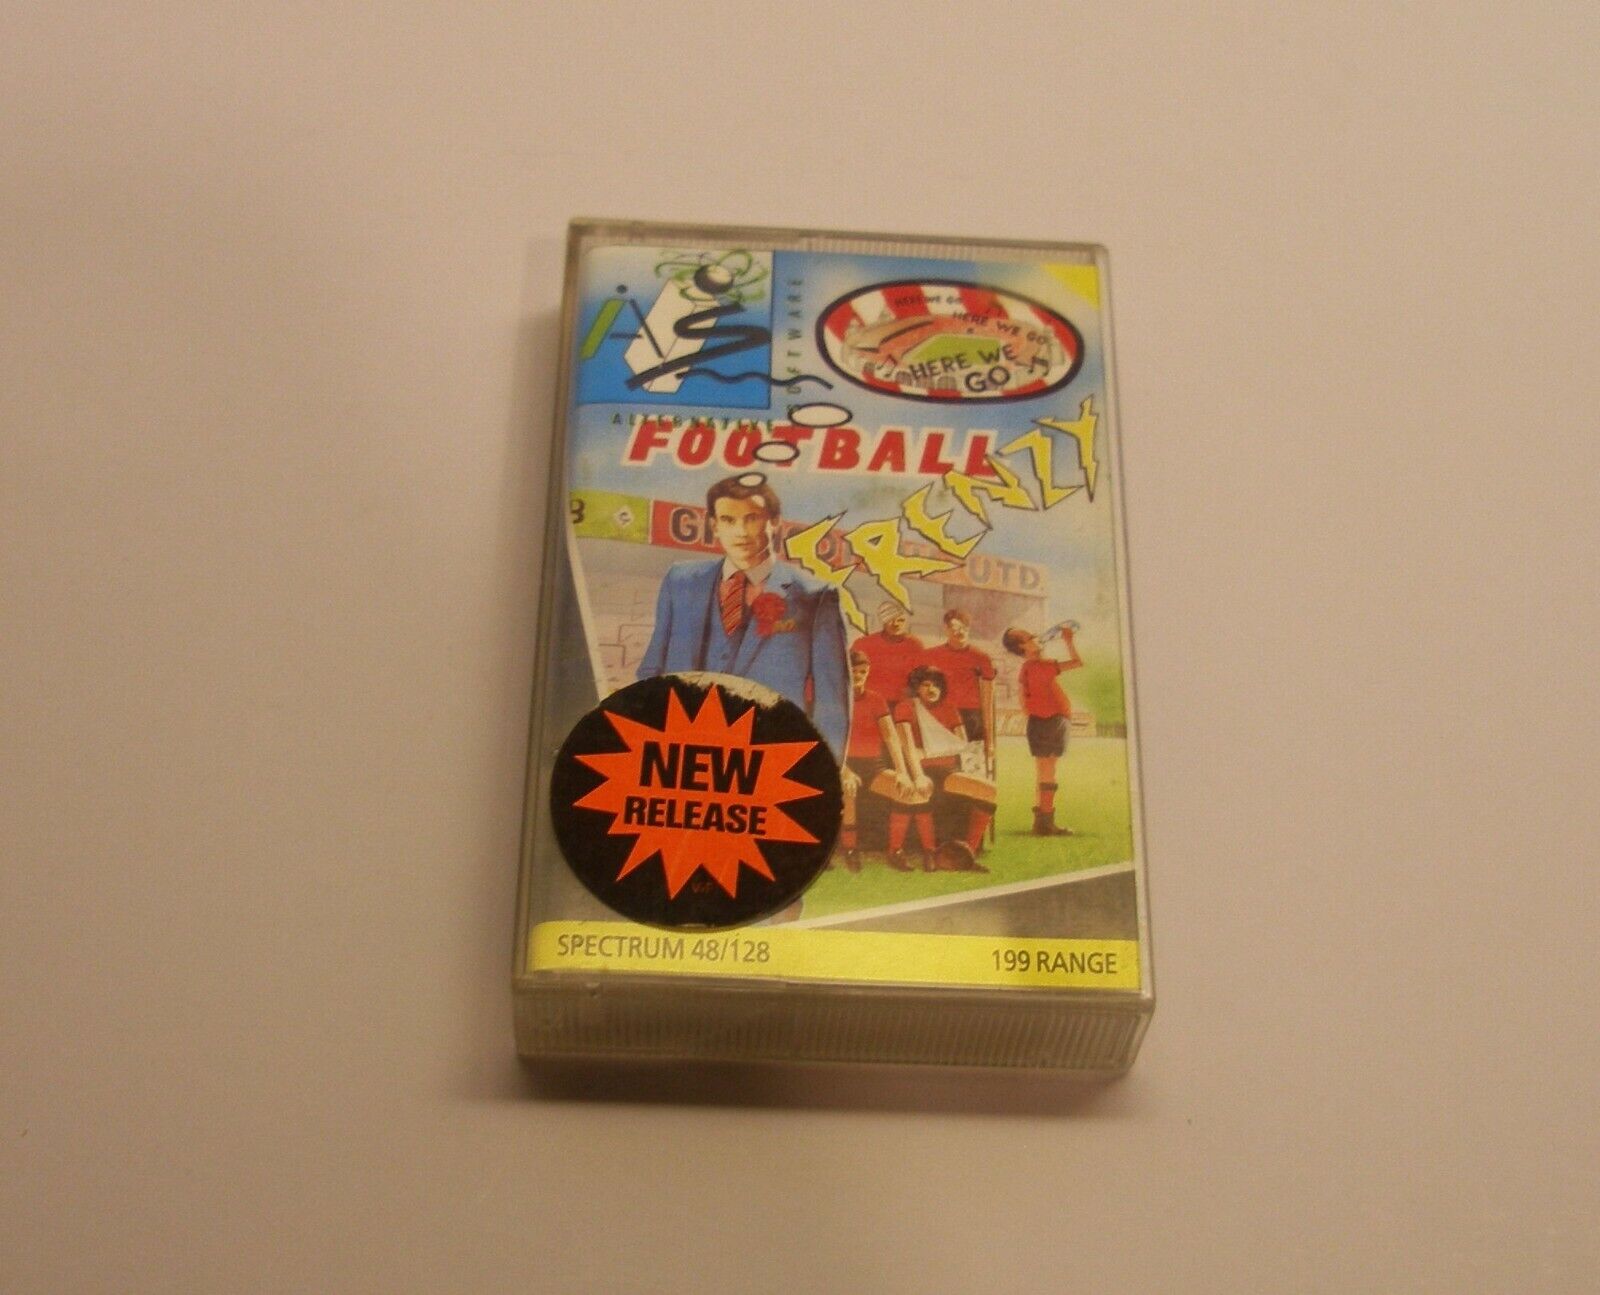 VERY RARE Football Frenzy by Alternative Software for ZX Spectrum